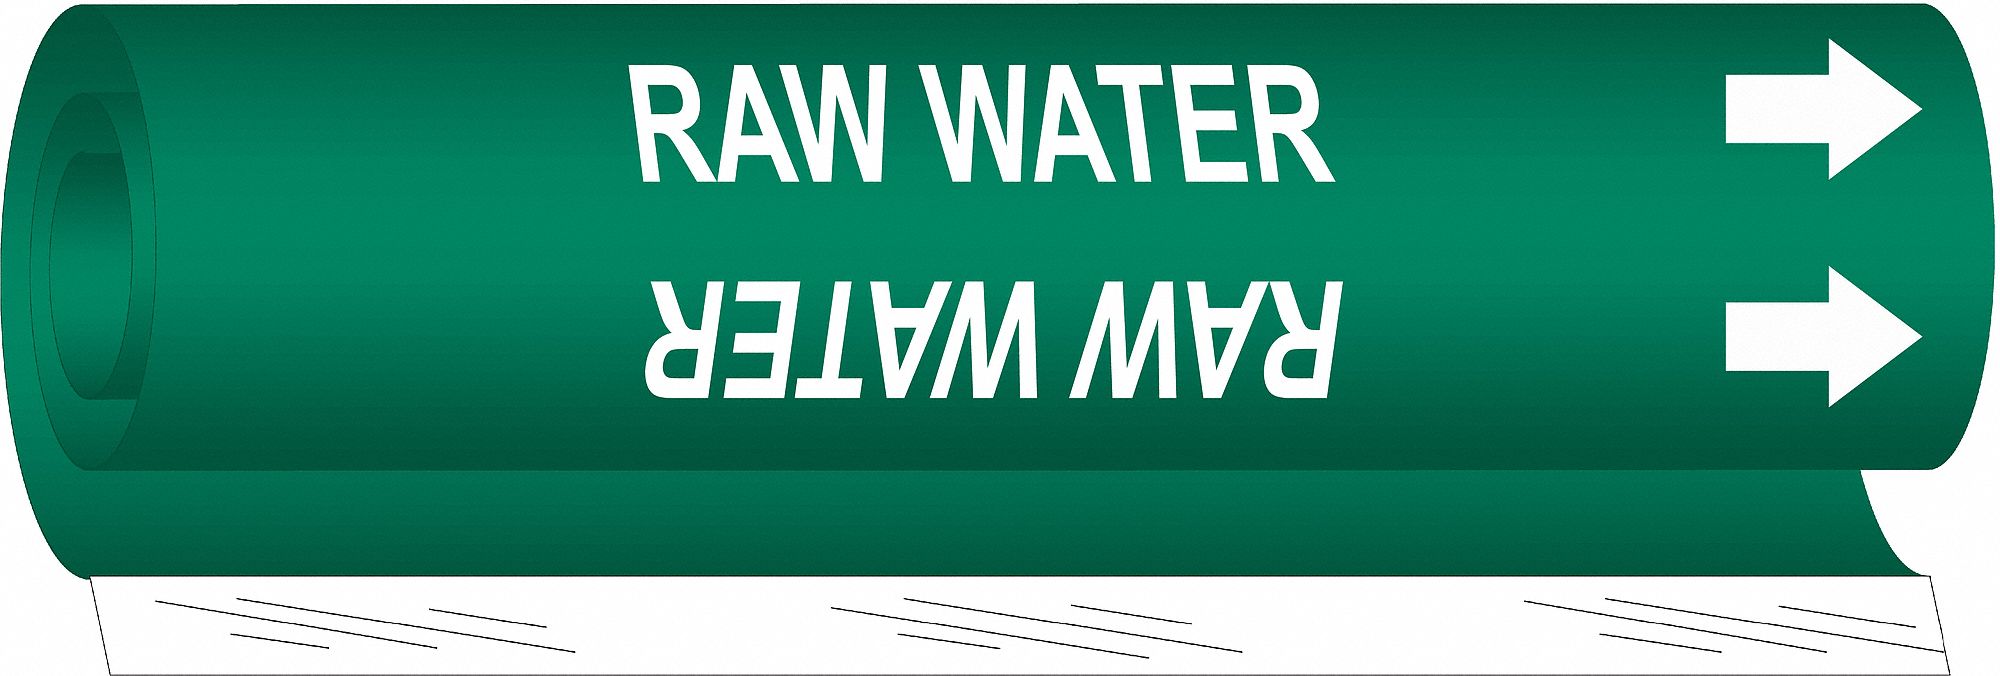 Pipe Marker,Raw Water,Gn,1-1/2to2-3/8 In